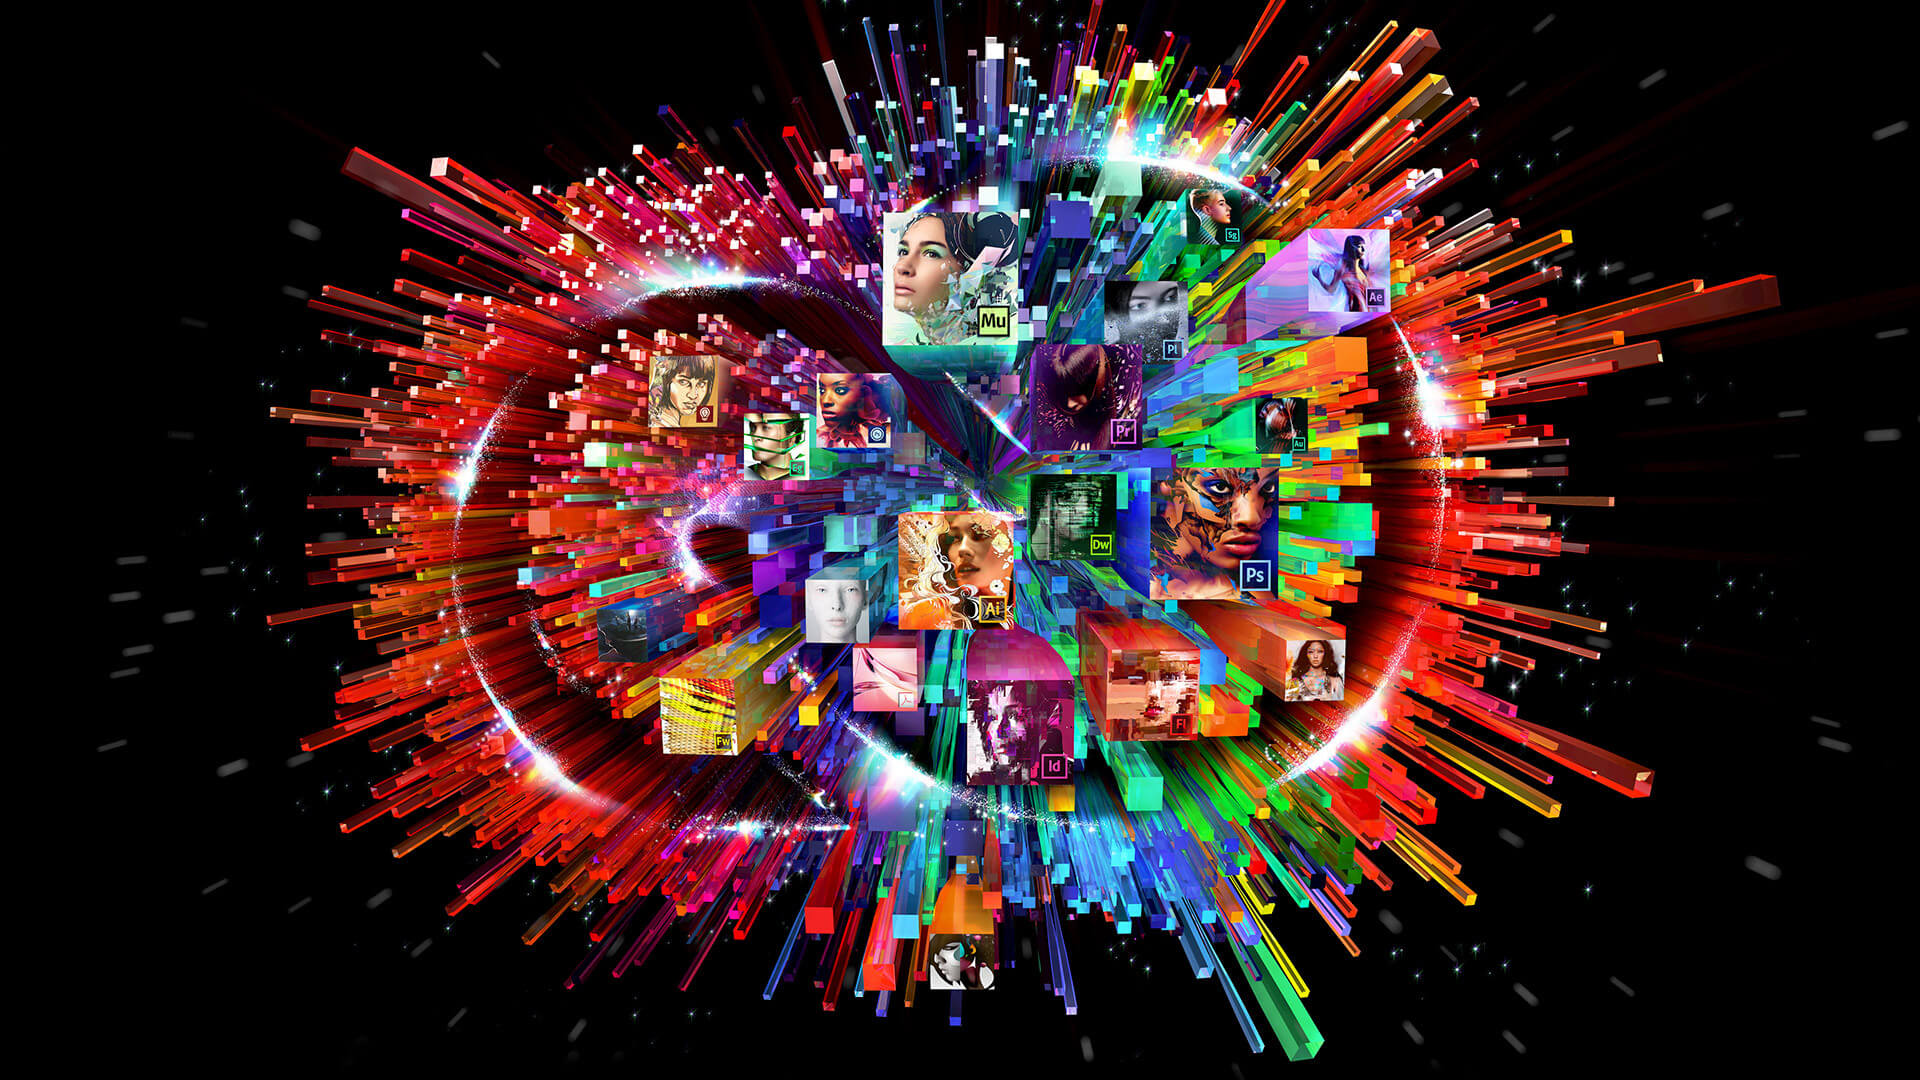 Adobe warns users of older Creative Cloud apps of potential copyright claims